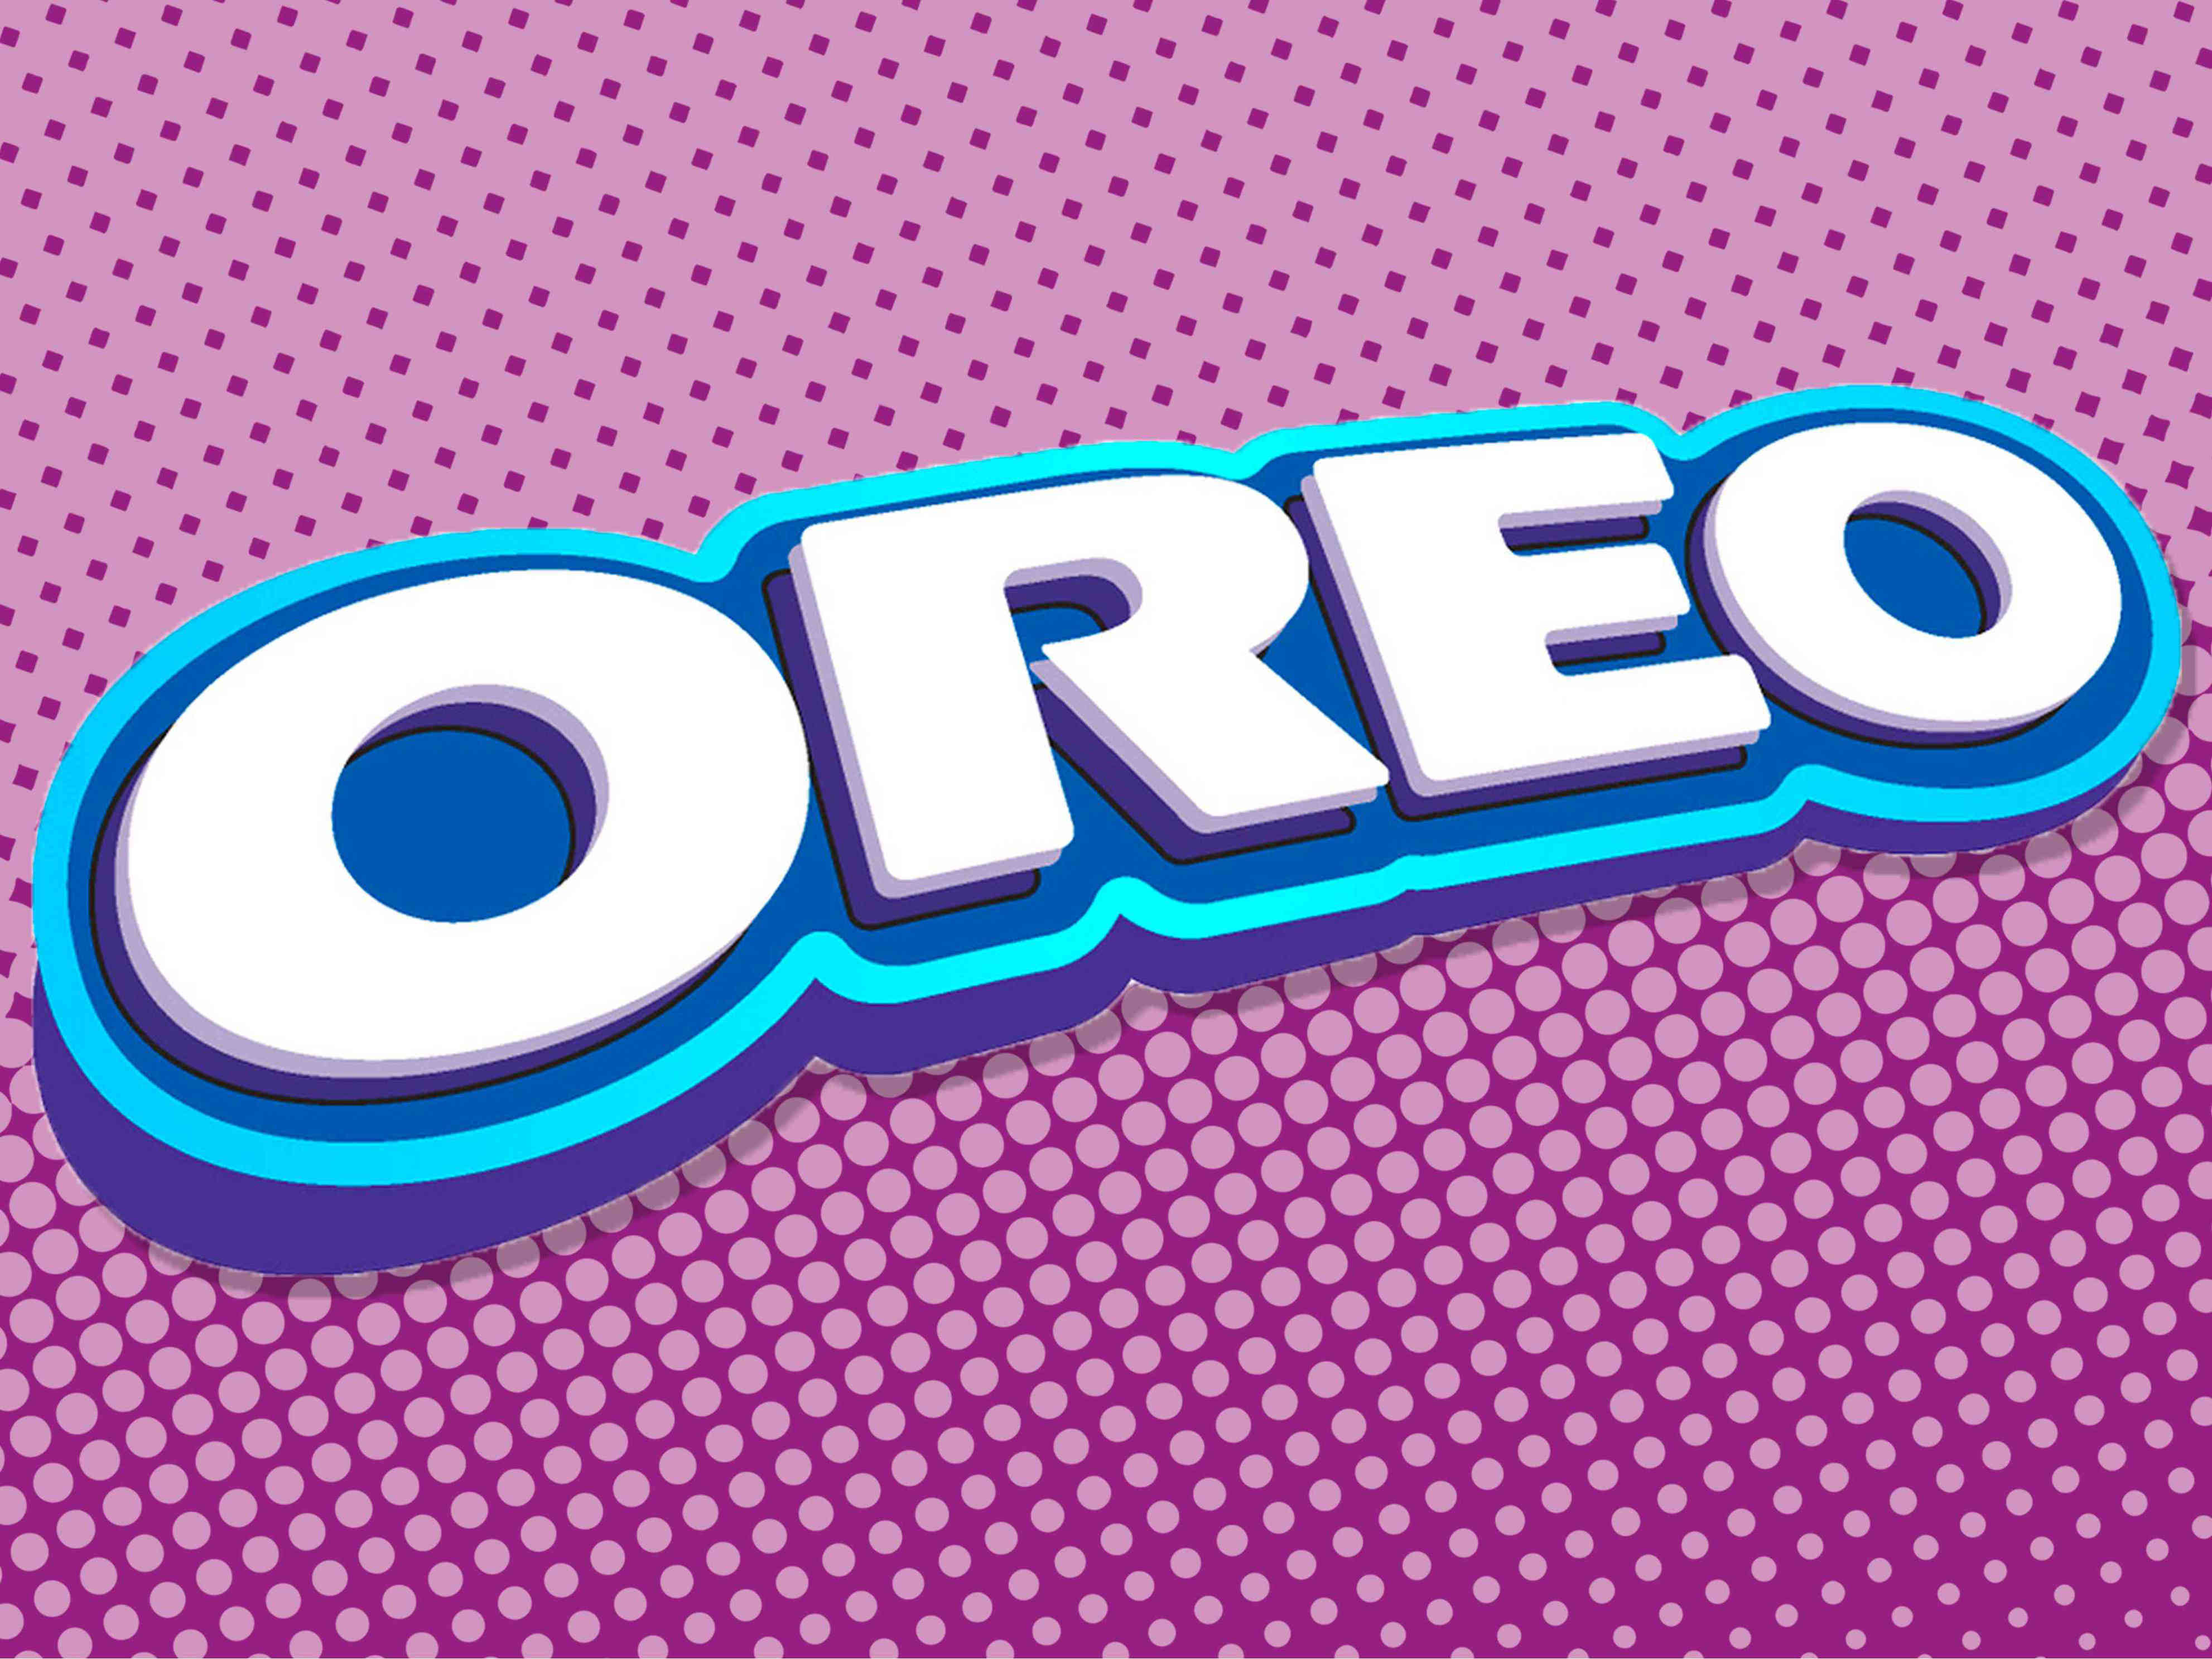 2 new oreo flavors are coming to shelves